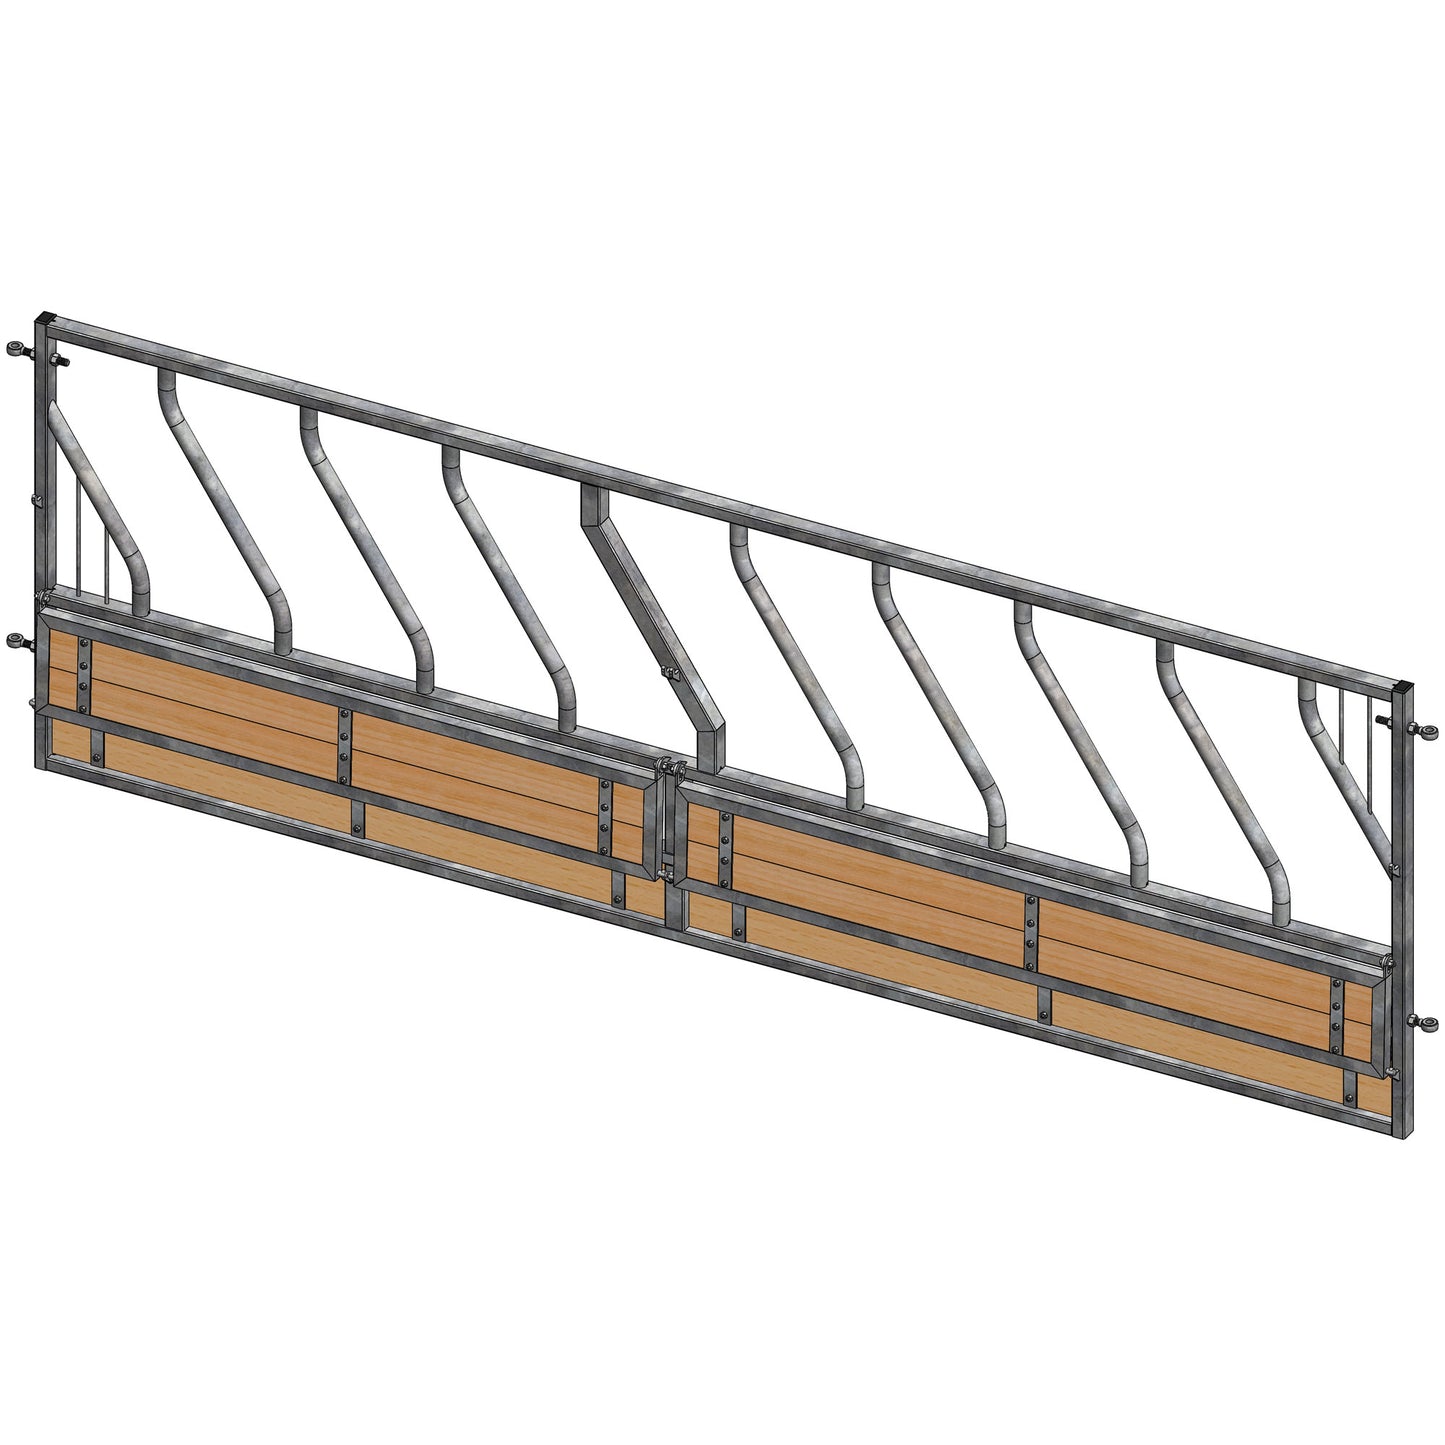 Pedigree Diagonal Cattle Feed Barrier Panel with Opening Timber Base For Sheep Feeding